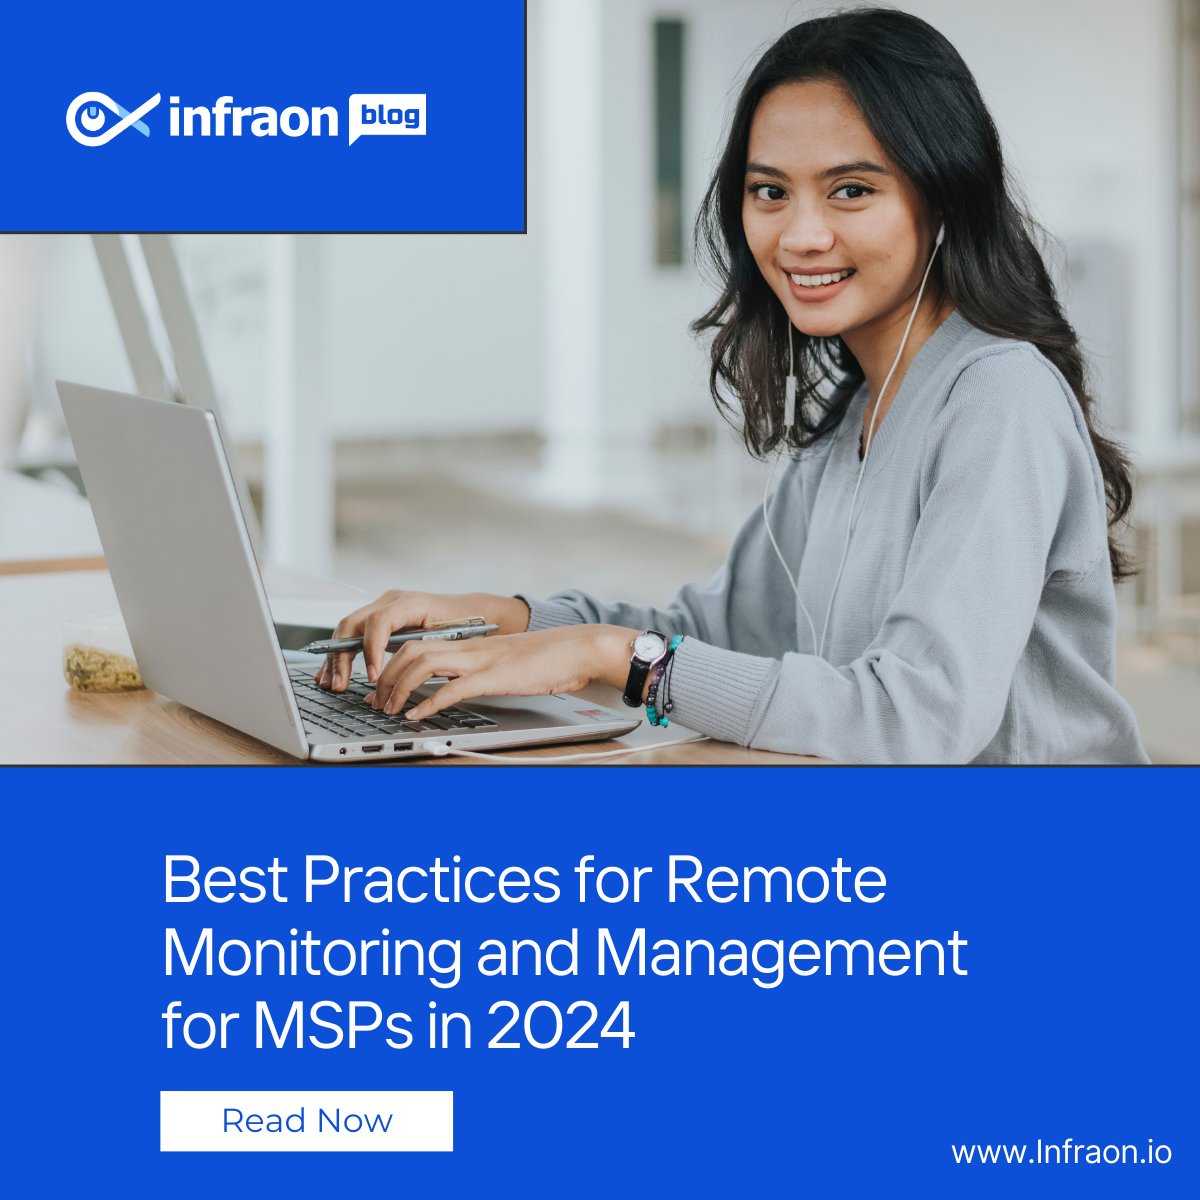 Is your #remote #monitoring and management feeling a little...well, remote from best practices? With 8 in 10 people now working remotely, #MSPs must ensure seamless IT operations. 😳 bit.ly/3TVZ5mC✨ #MSP #IT #Security #Automation #ITManagement #FutureTech